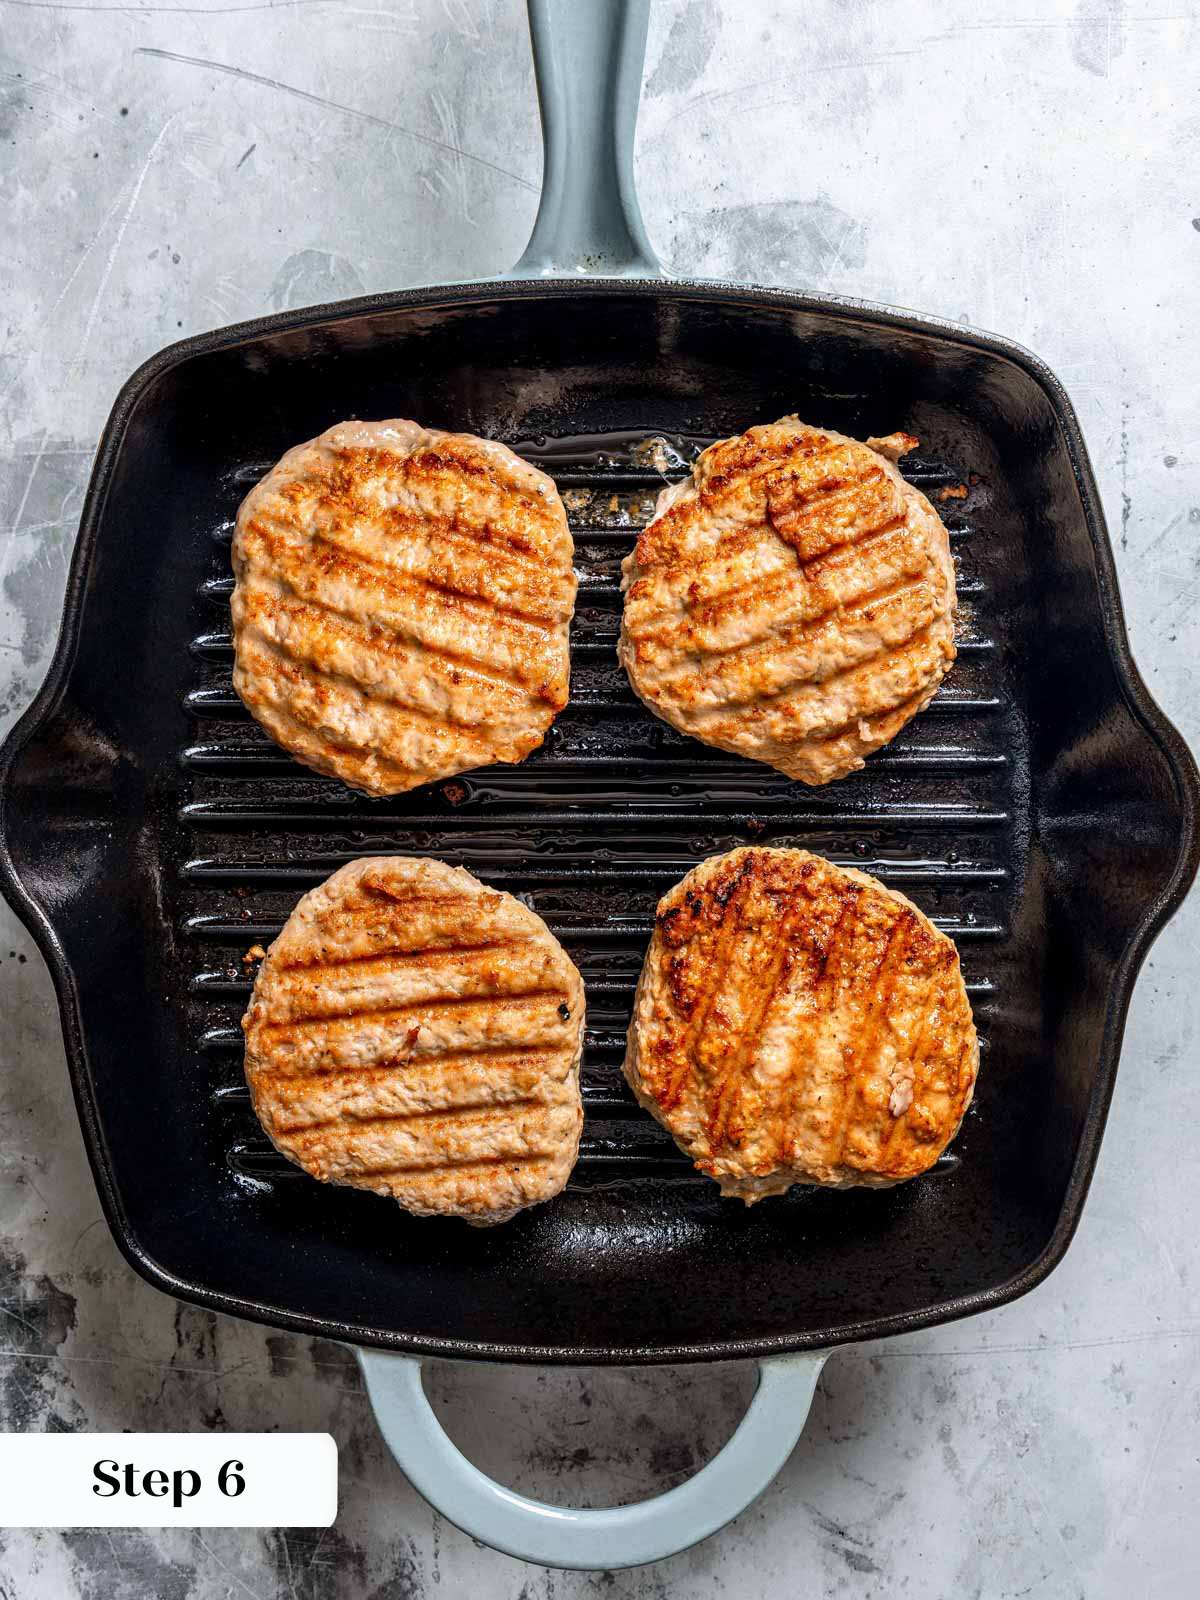 4 turkey burgers cooking in grill pan.